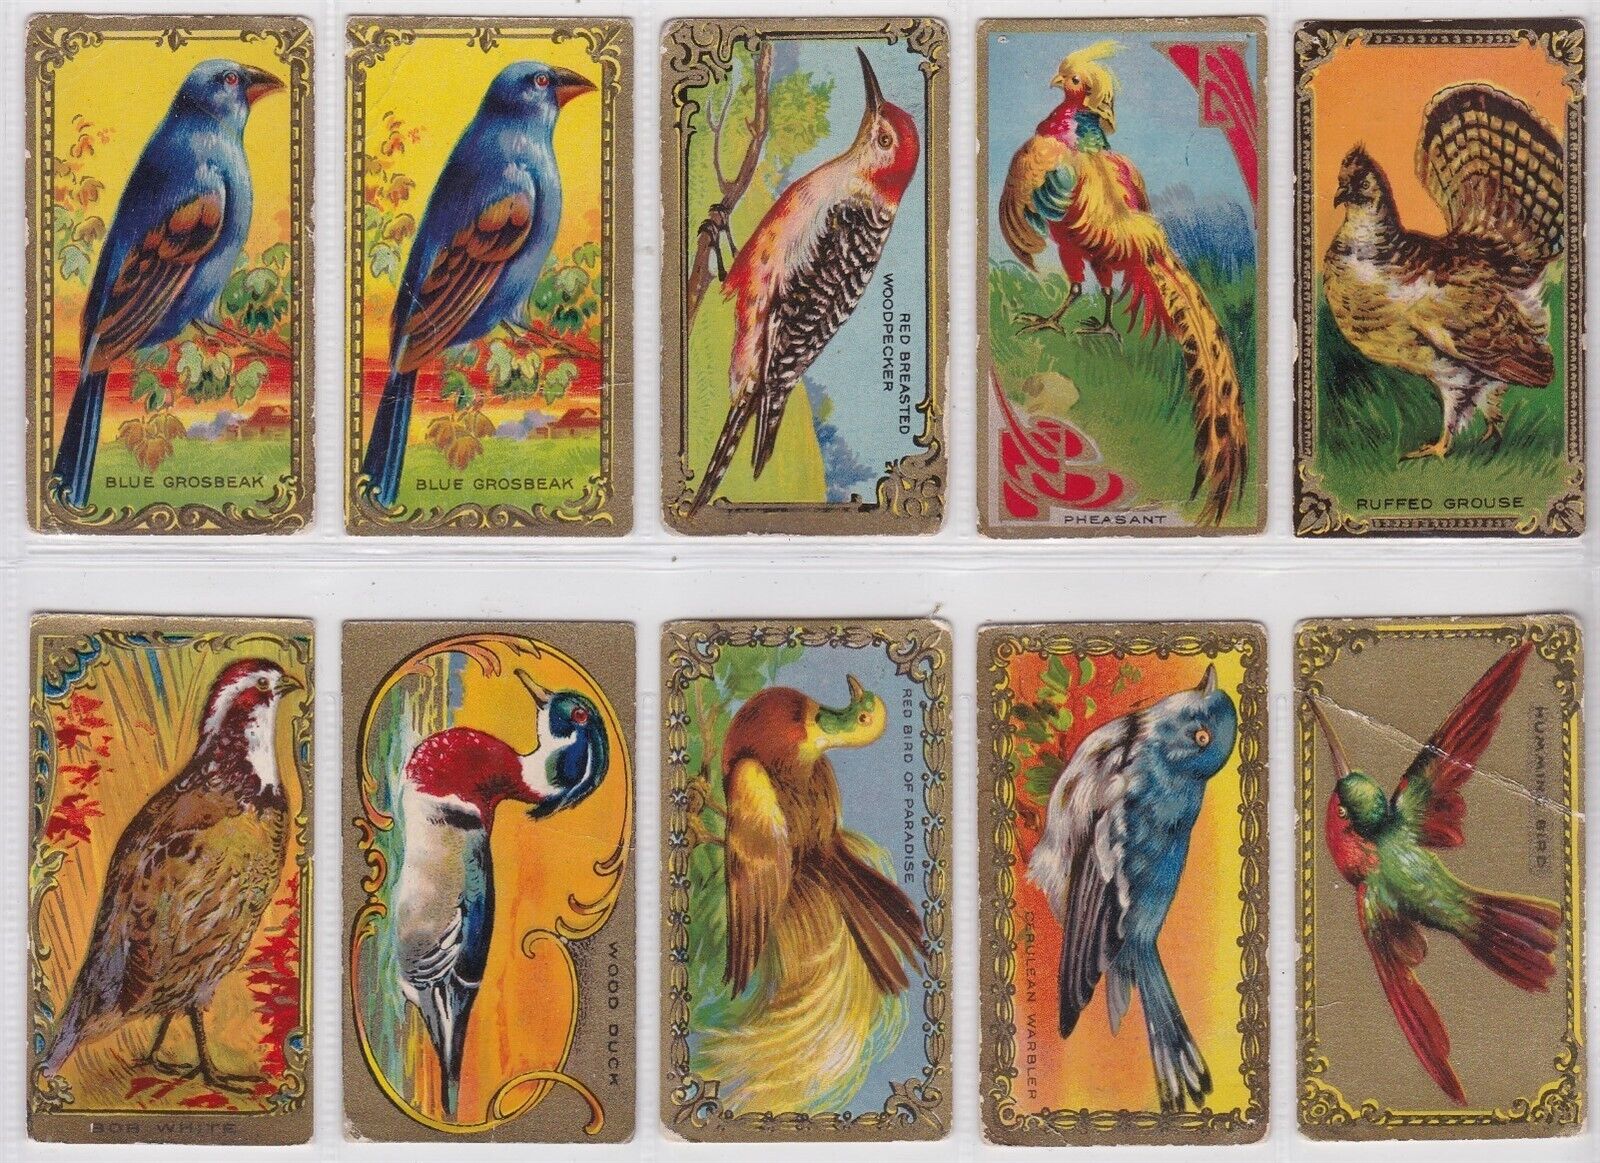 C14 GAME BIRDS, IMPERIAL TOBACCO, LOT OF 10 CARDS BEAUTIFUL TOBACCO SET